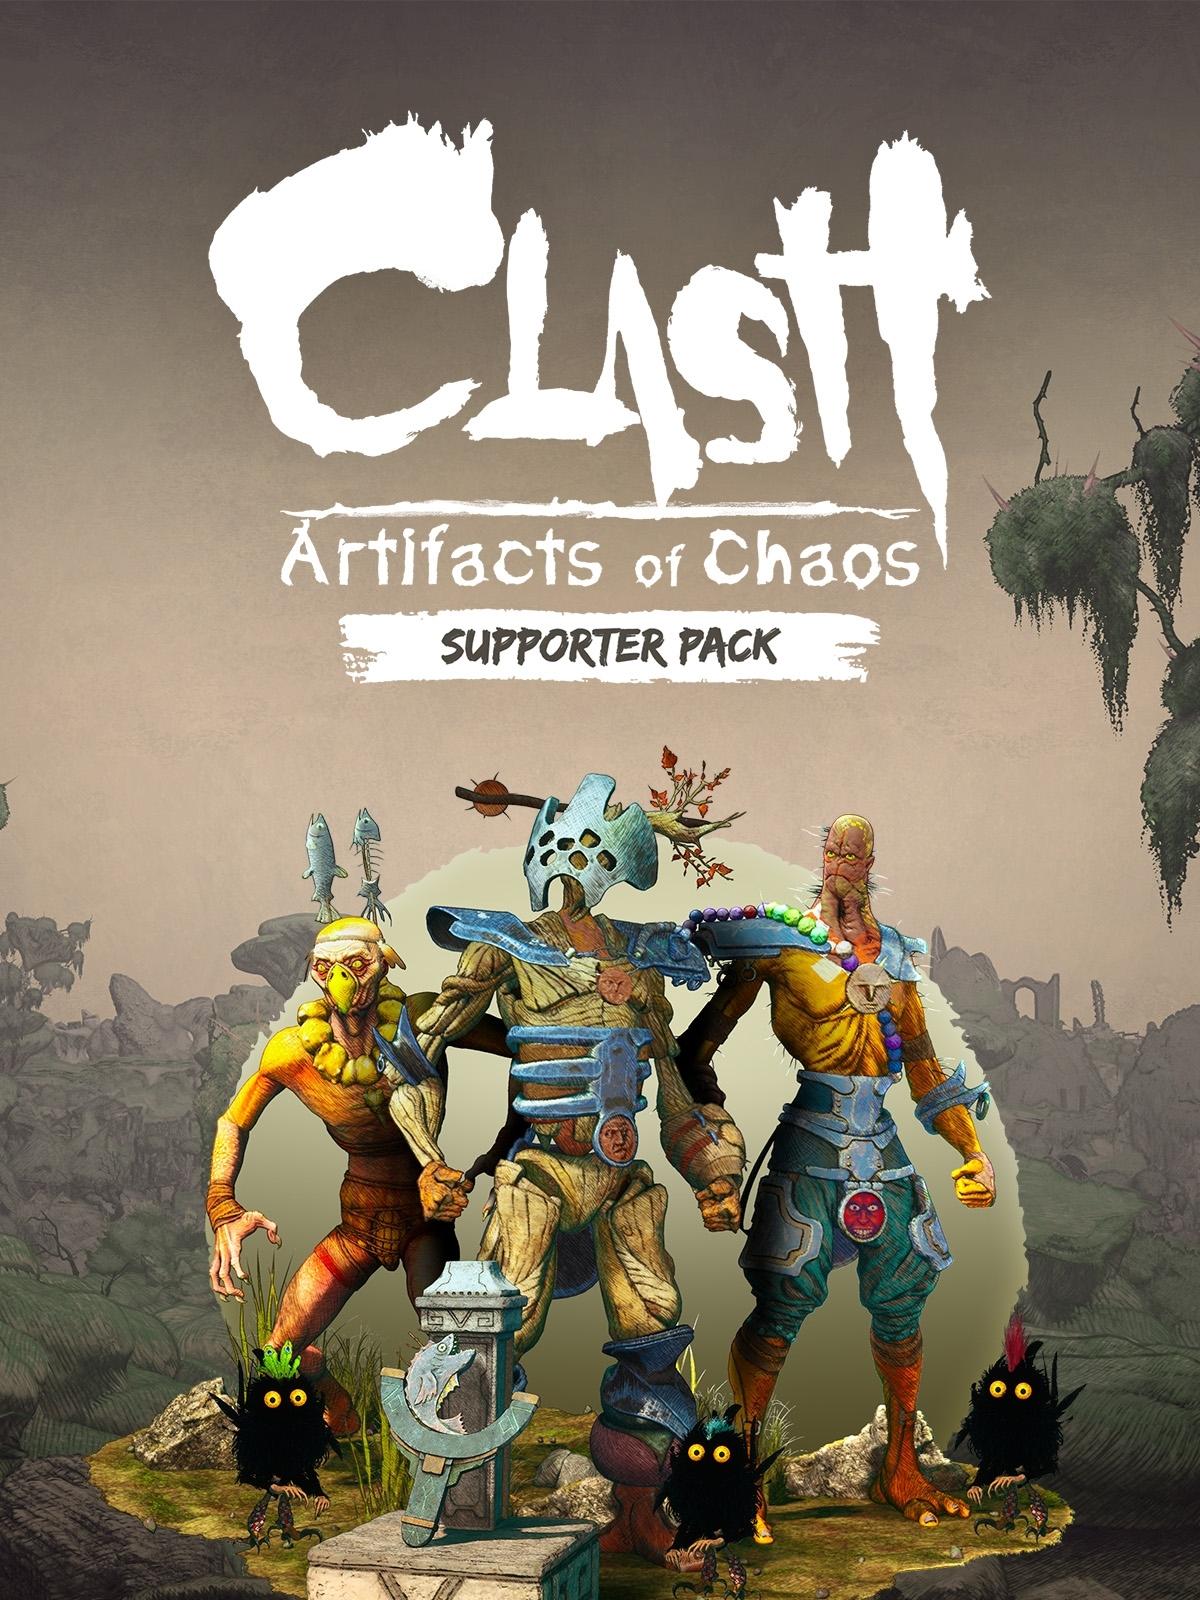 Clash: Artifacts of Chaos - Supporter Pack DLC | WW (5d30d6e9-0111-49cf-ab52-4f681677f802)